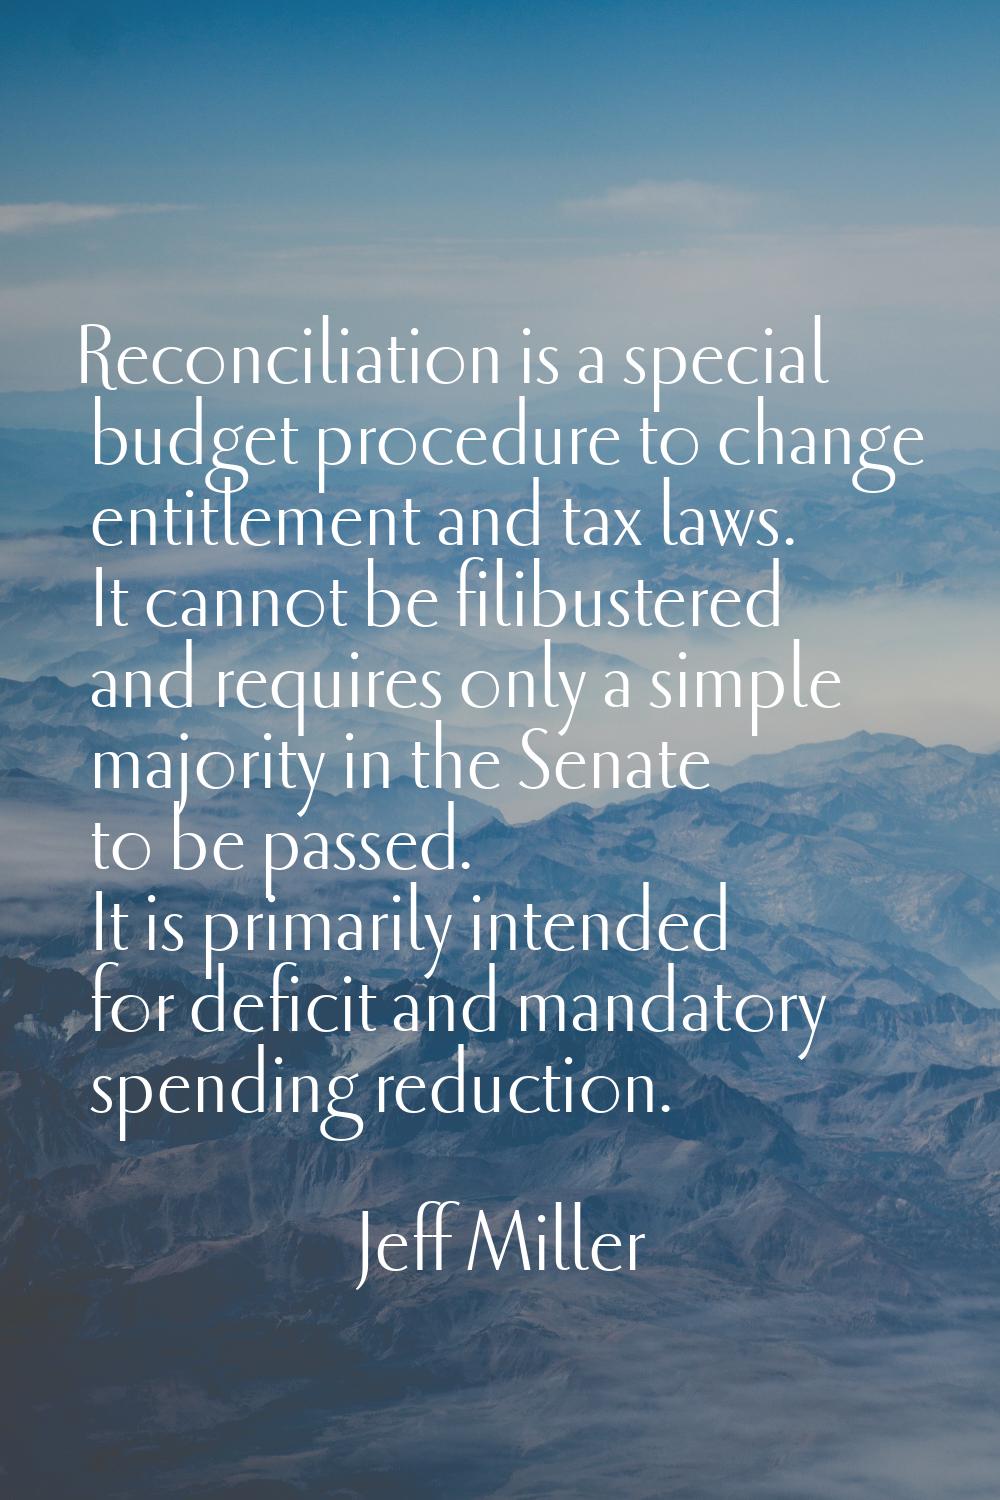 Reconciliation is a special budget procedure to change entitlement and tax laws. It cannot be filib